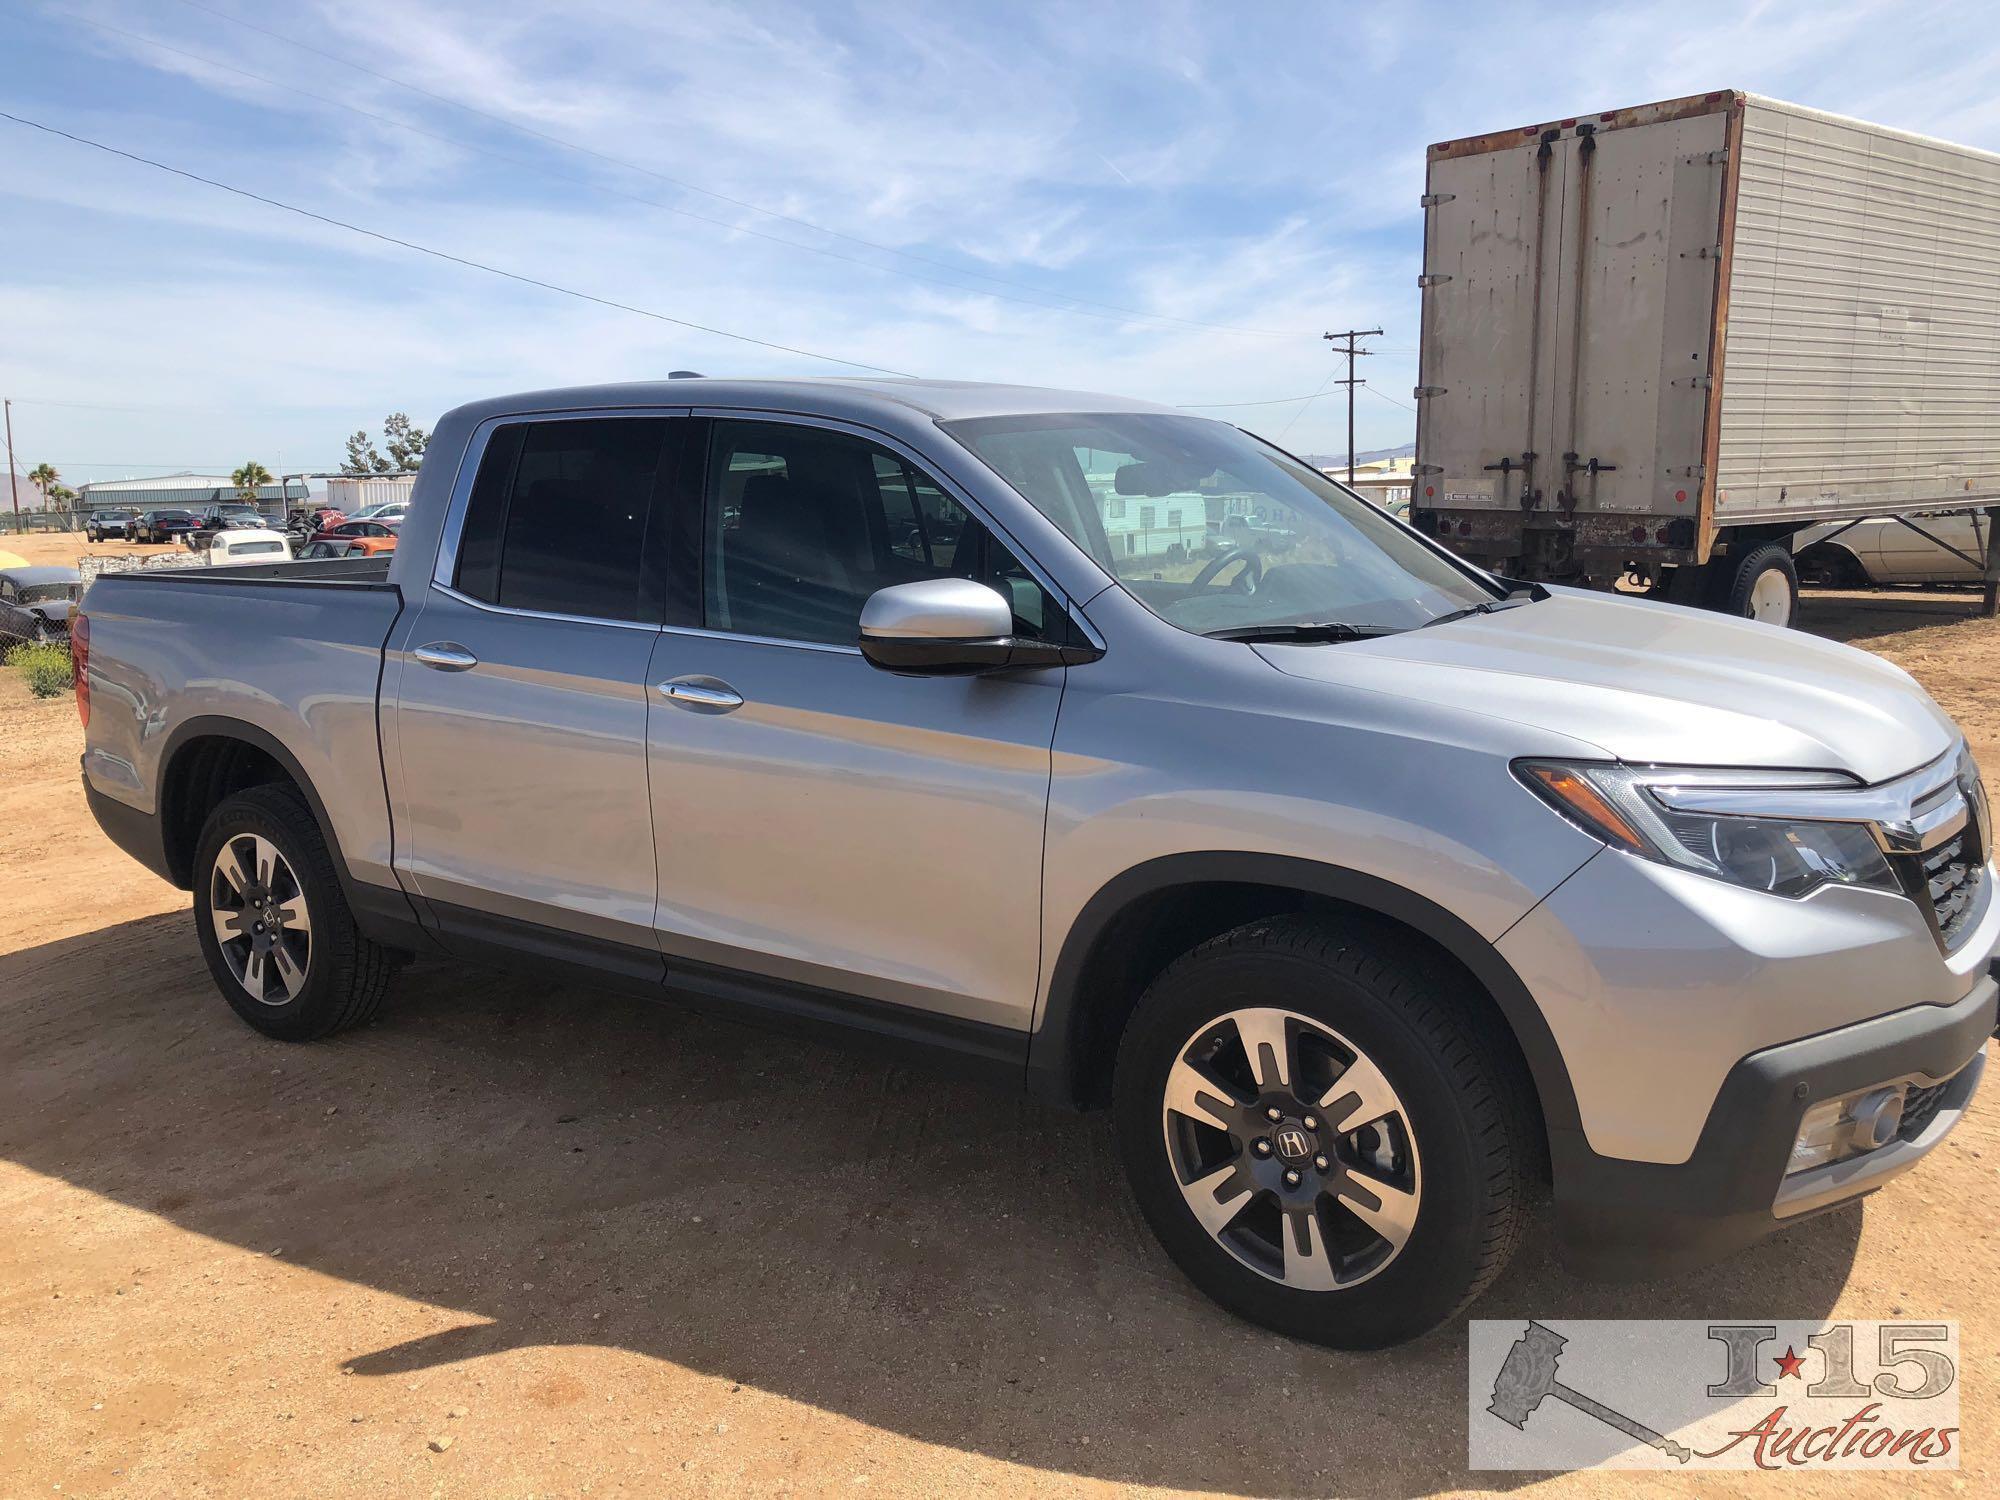 2017 Honda Ridgeline AWD Silver, 1 Owner Truck!! ONLY 11,XXX MILES!!! CLEAN AUTO REPORT!!!